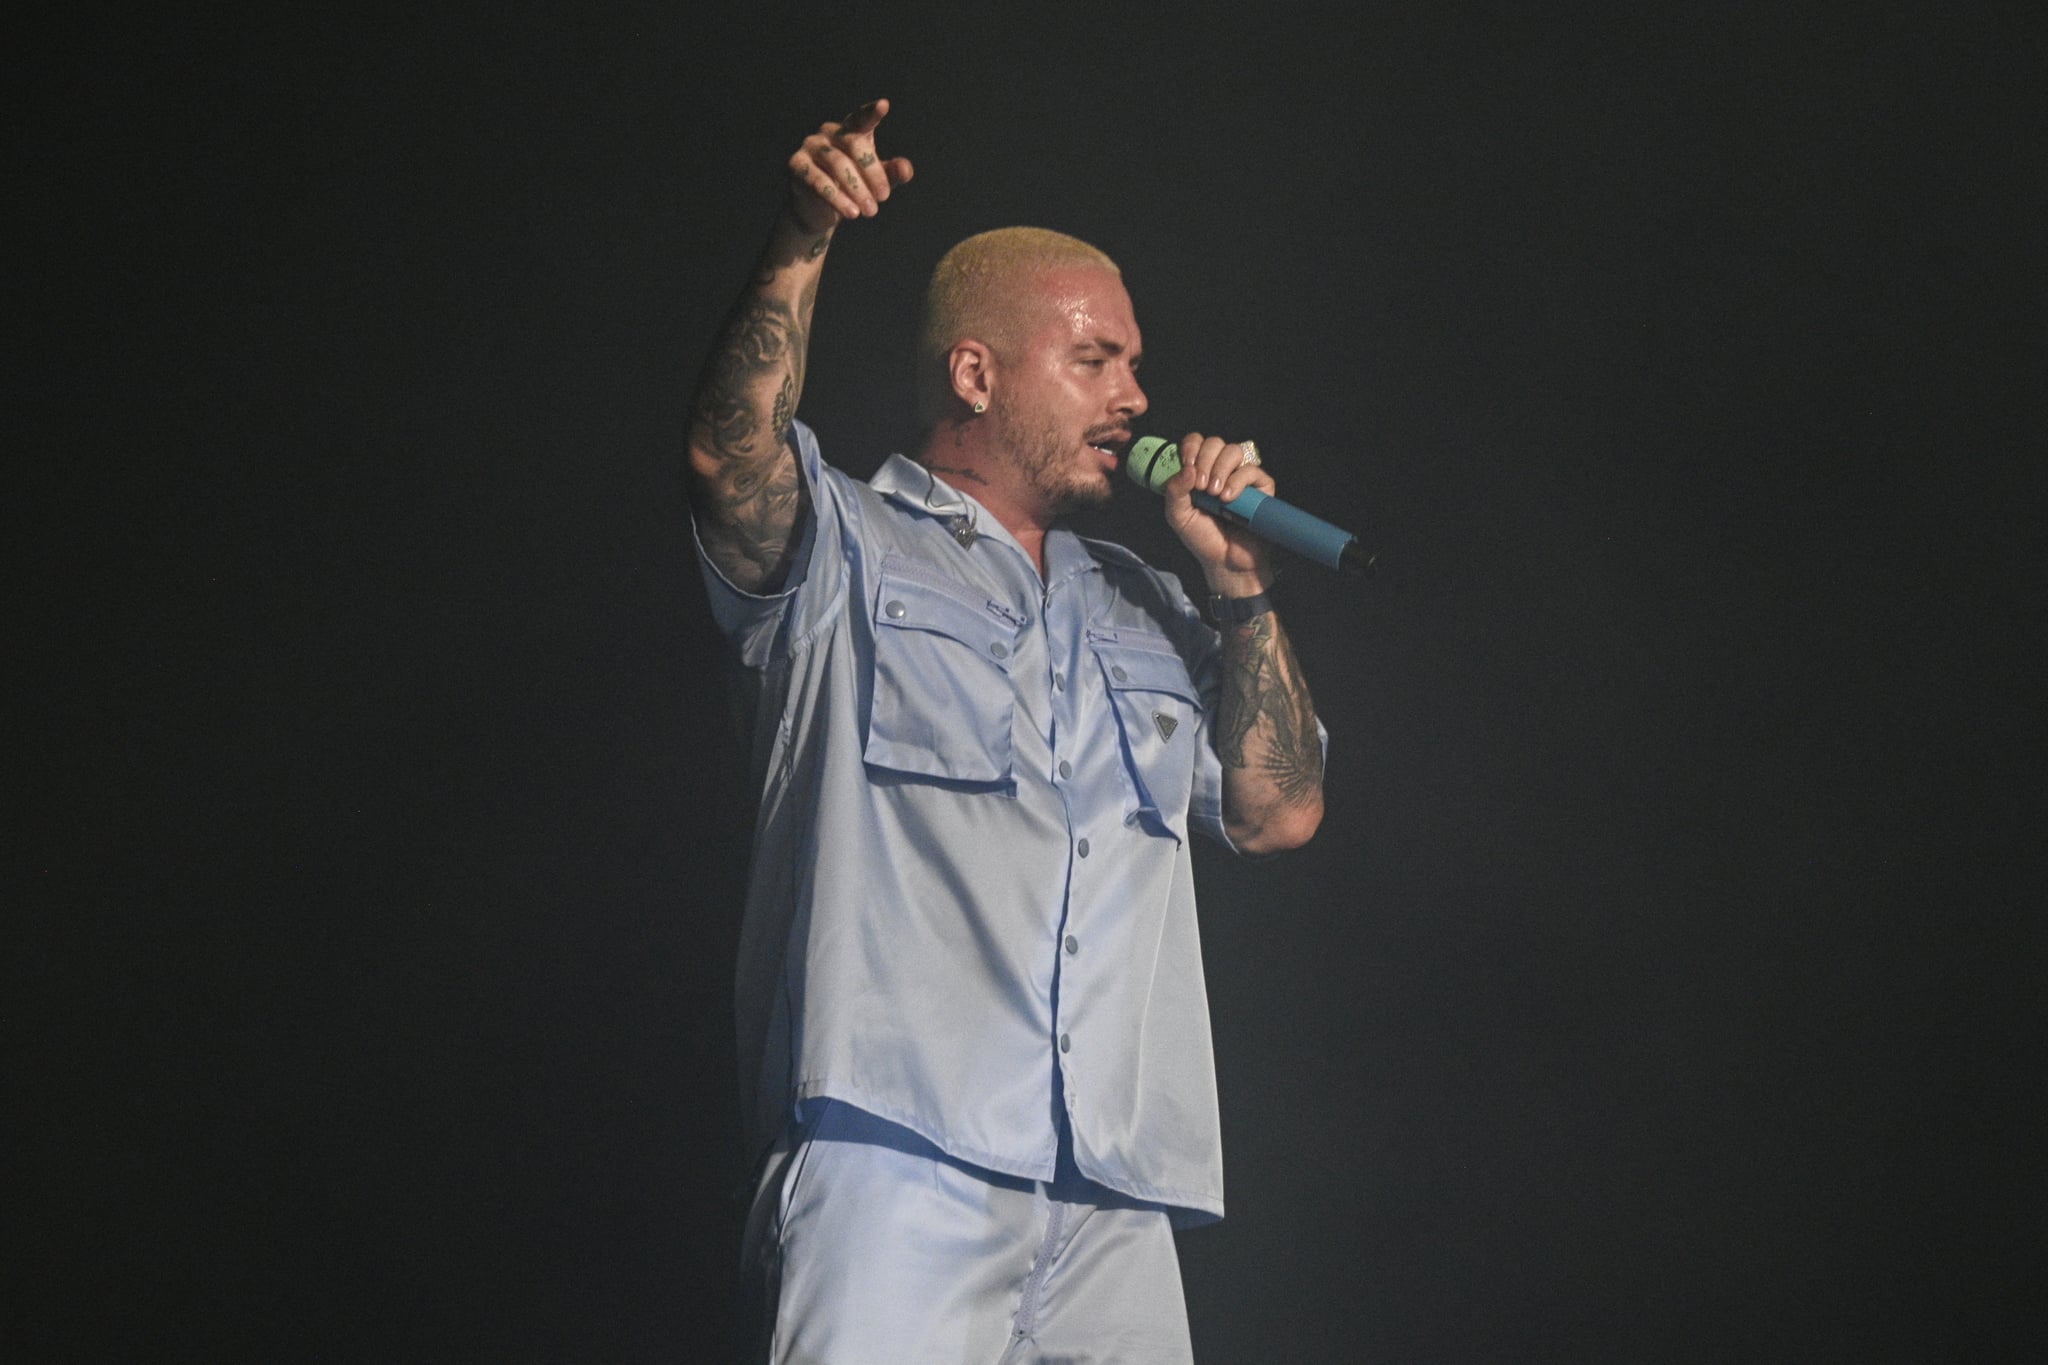 NEW YORK, NEW YORK - SEPTEMBER 25: J Balvin performs during the 2021 Governors Ball Music Festival at Citi Field on September 25, 2021 in New York City. (Photo by Astrida Valigorsky/Getty Images)